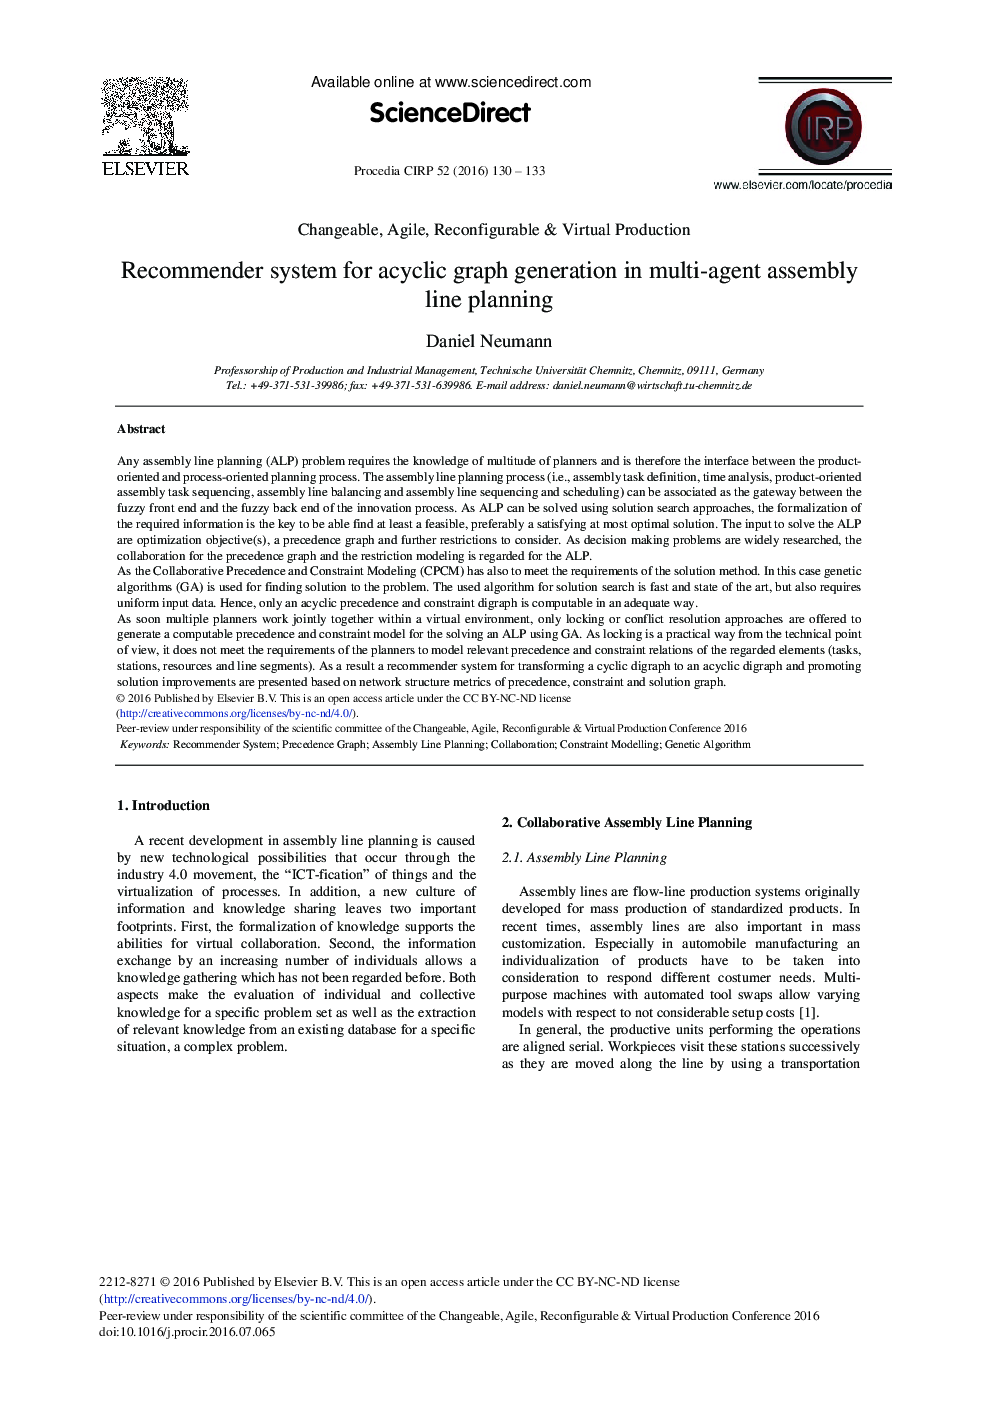 Recommender System for Acyclic Graph Generation in Multi-agent Assembly Line Planning 